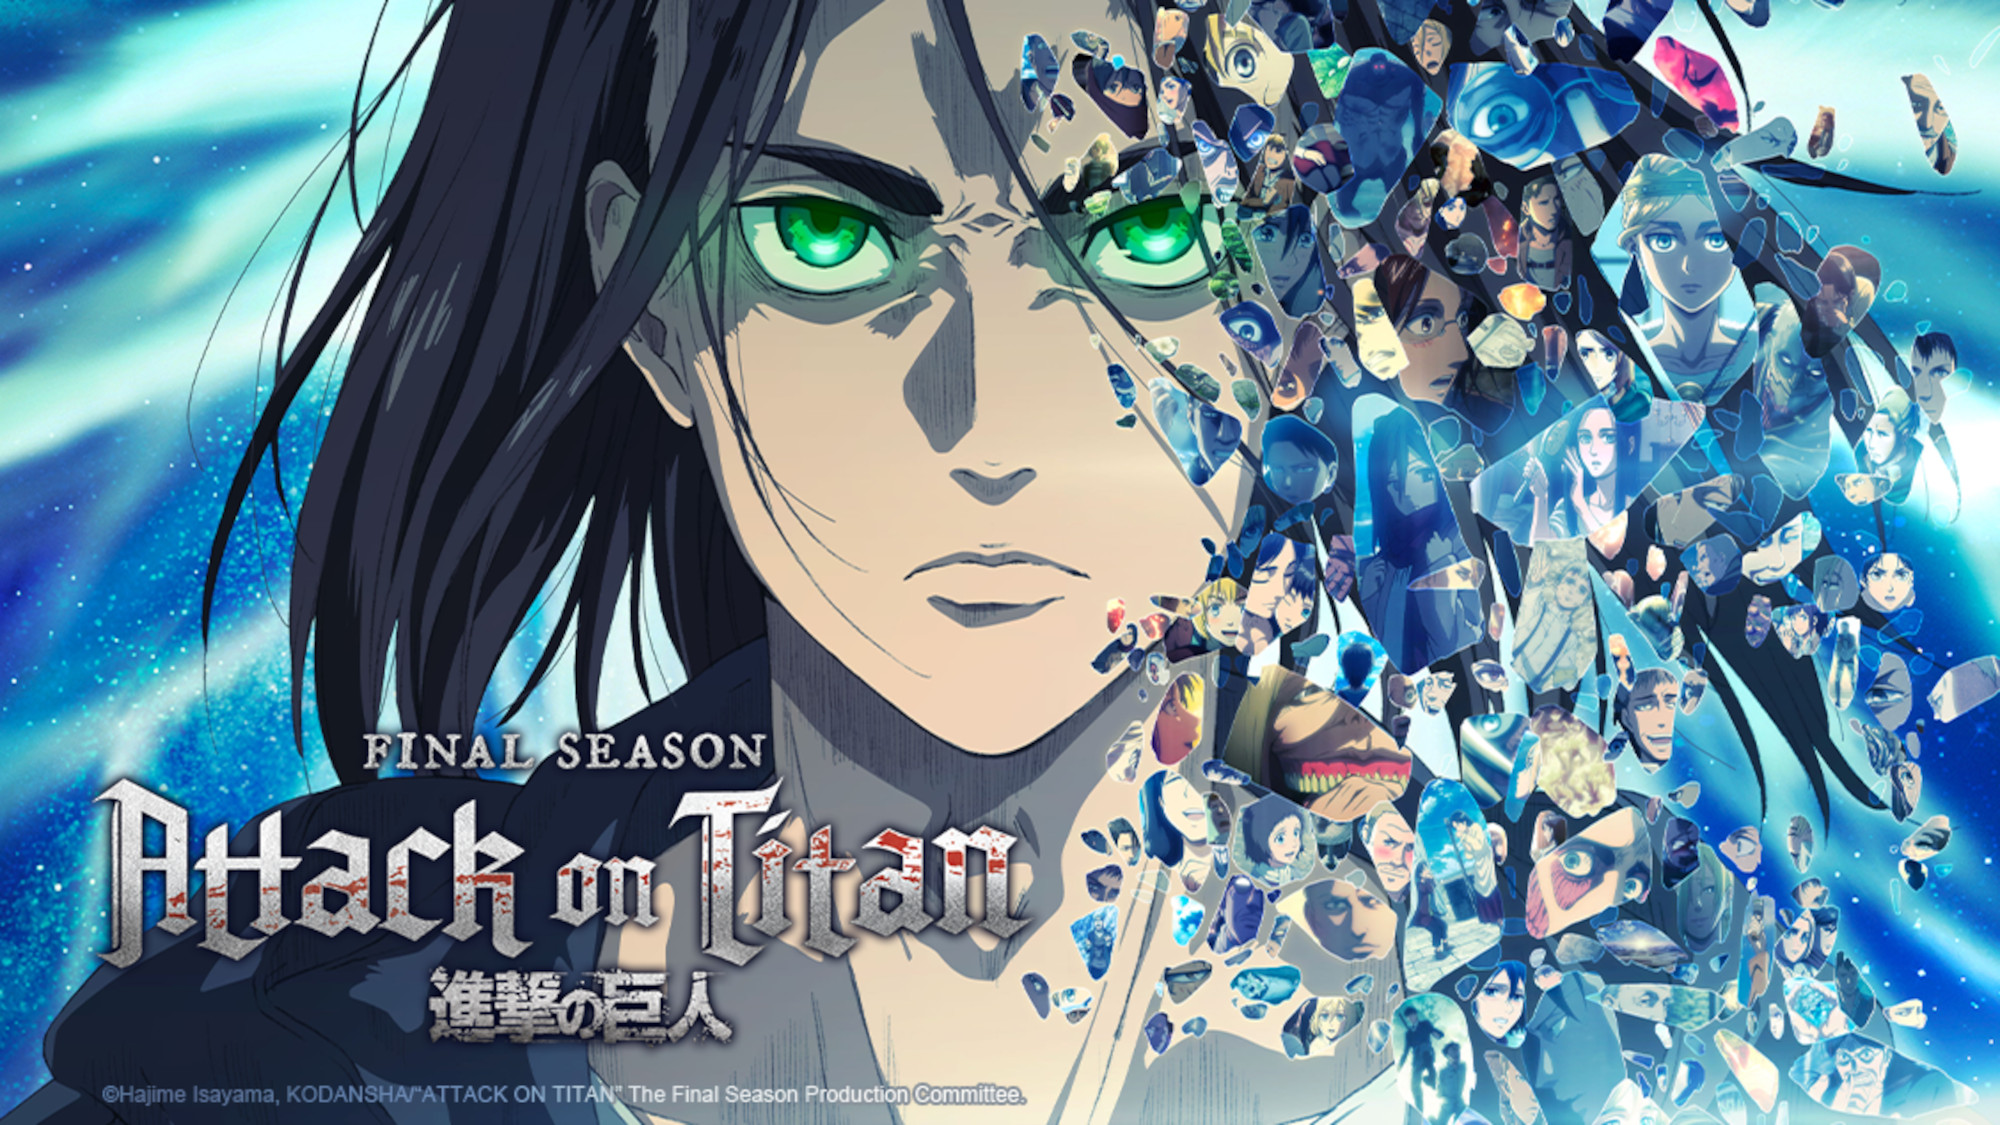 'Attack on Titan' Season 4 Part 2 key art from Crunchyroll's Winter 2022 anime lineup. It shows Eren Yeager with half his face made up of scenes from the series.